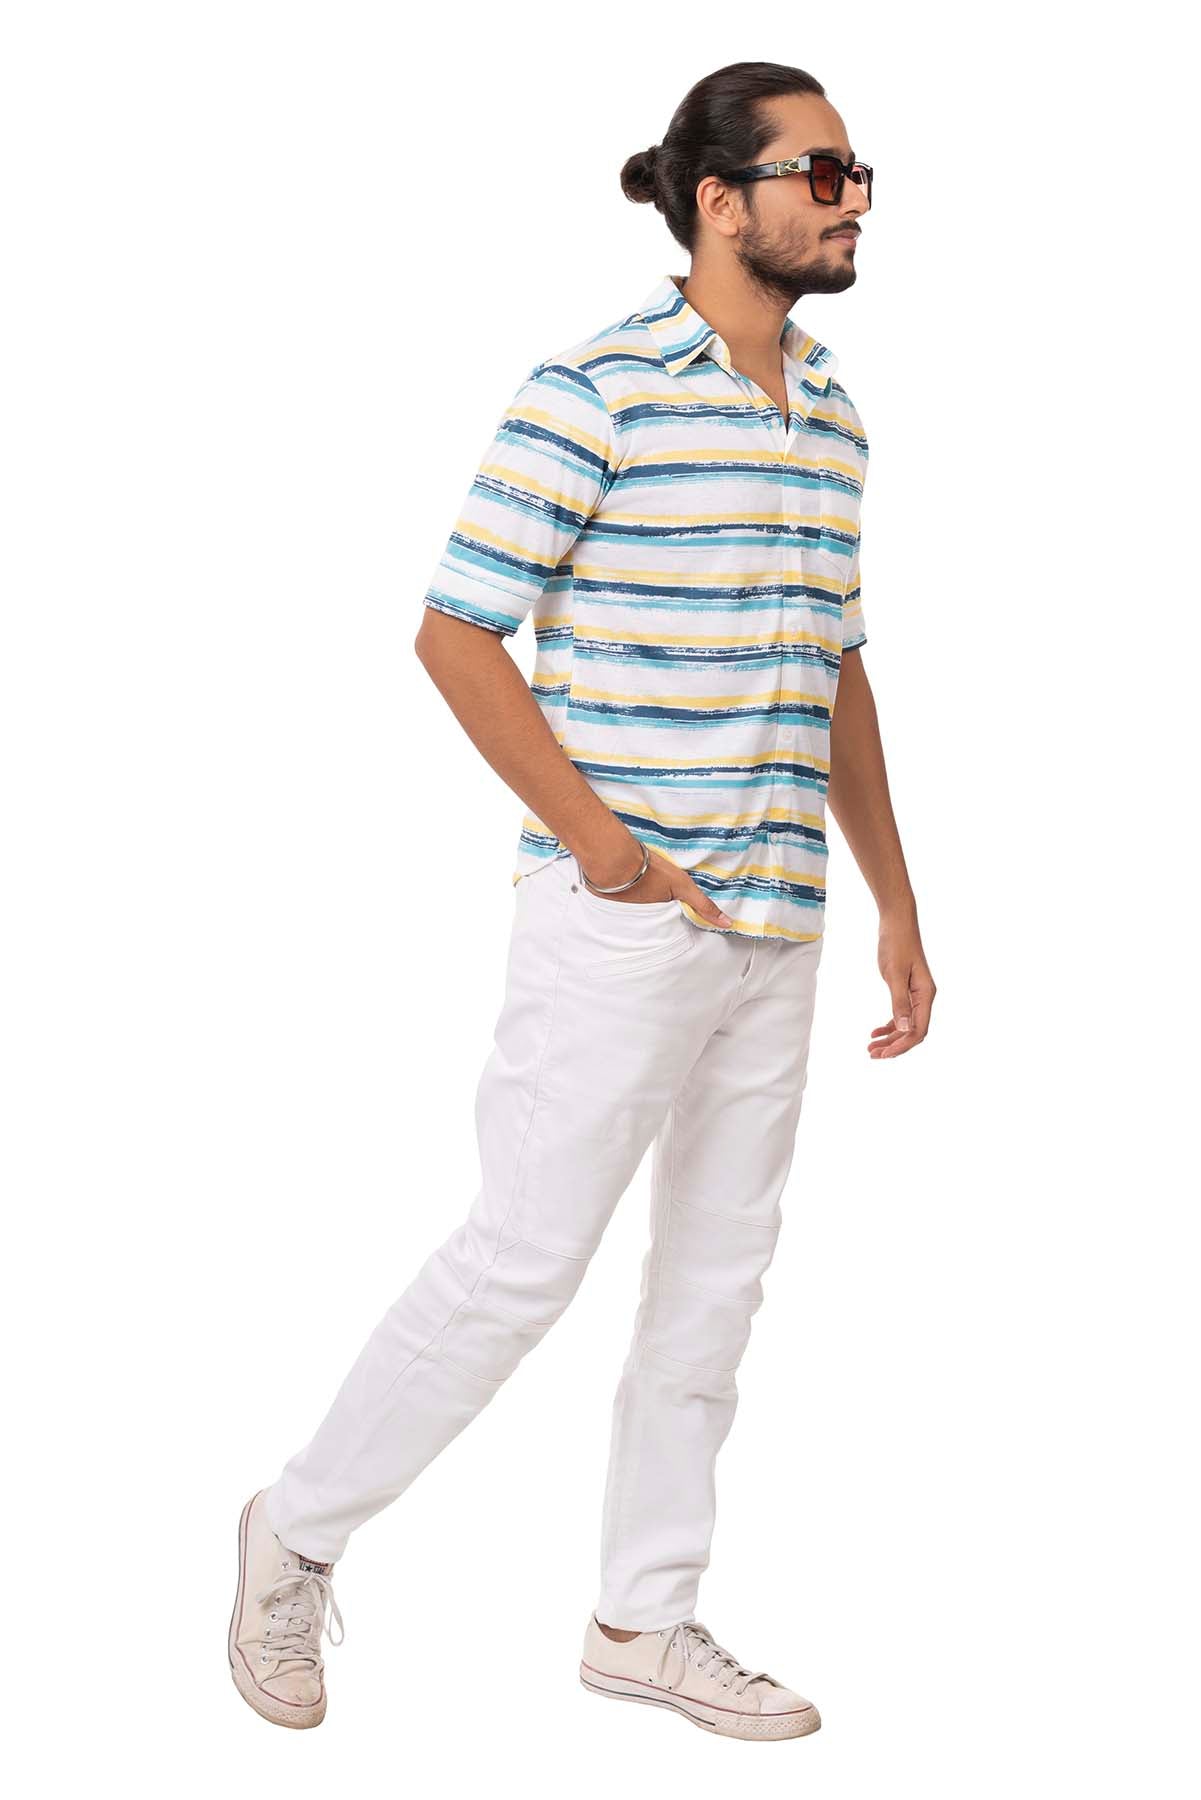 White with Blue and Yellow Rough Horizontal Stripes Pattern Regular Fit Shirtee